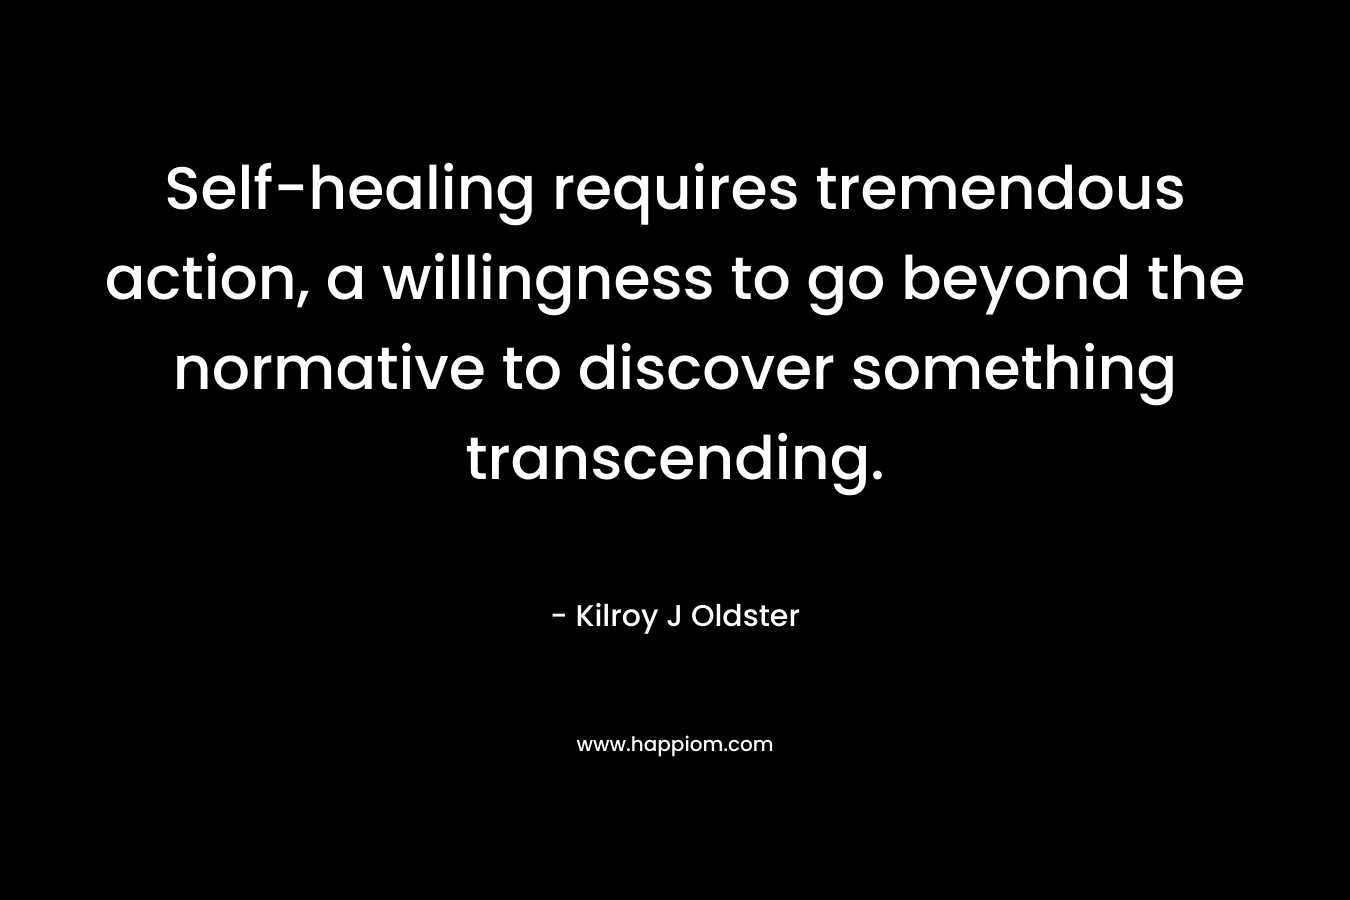 Self-healing requires tremendous action, a willingness to go beyond the normative to discover something transcending. – Kilroy J Oldster